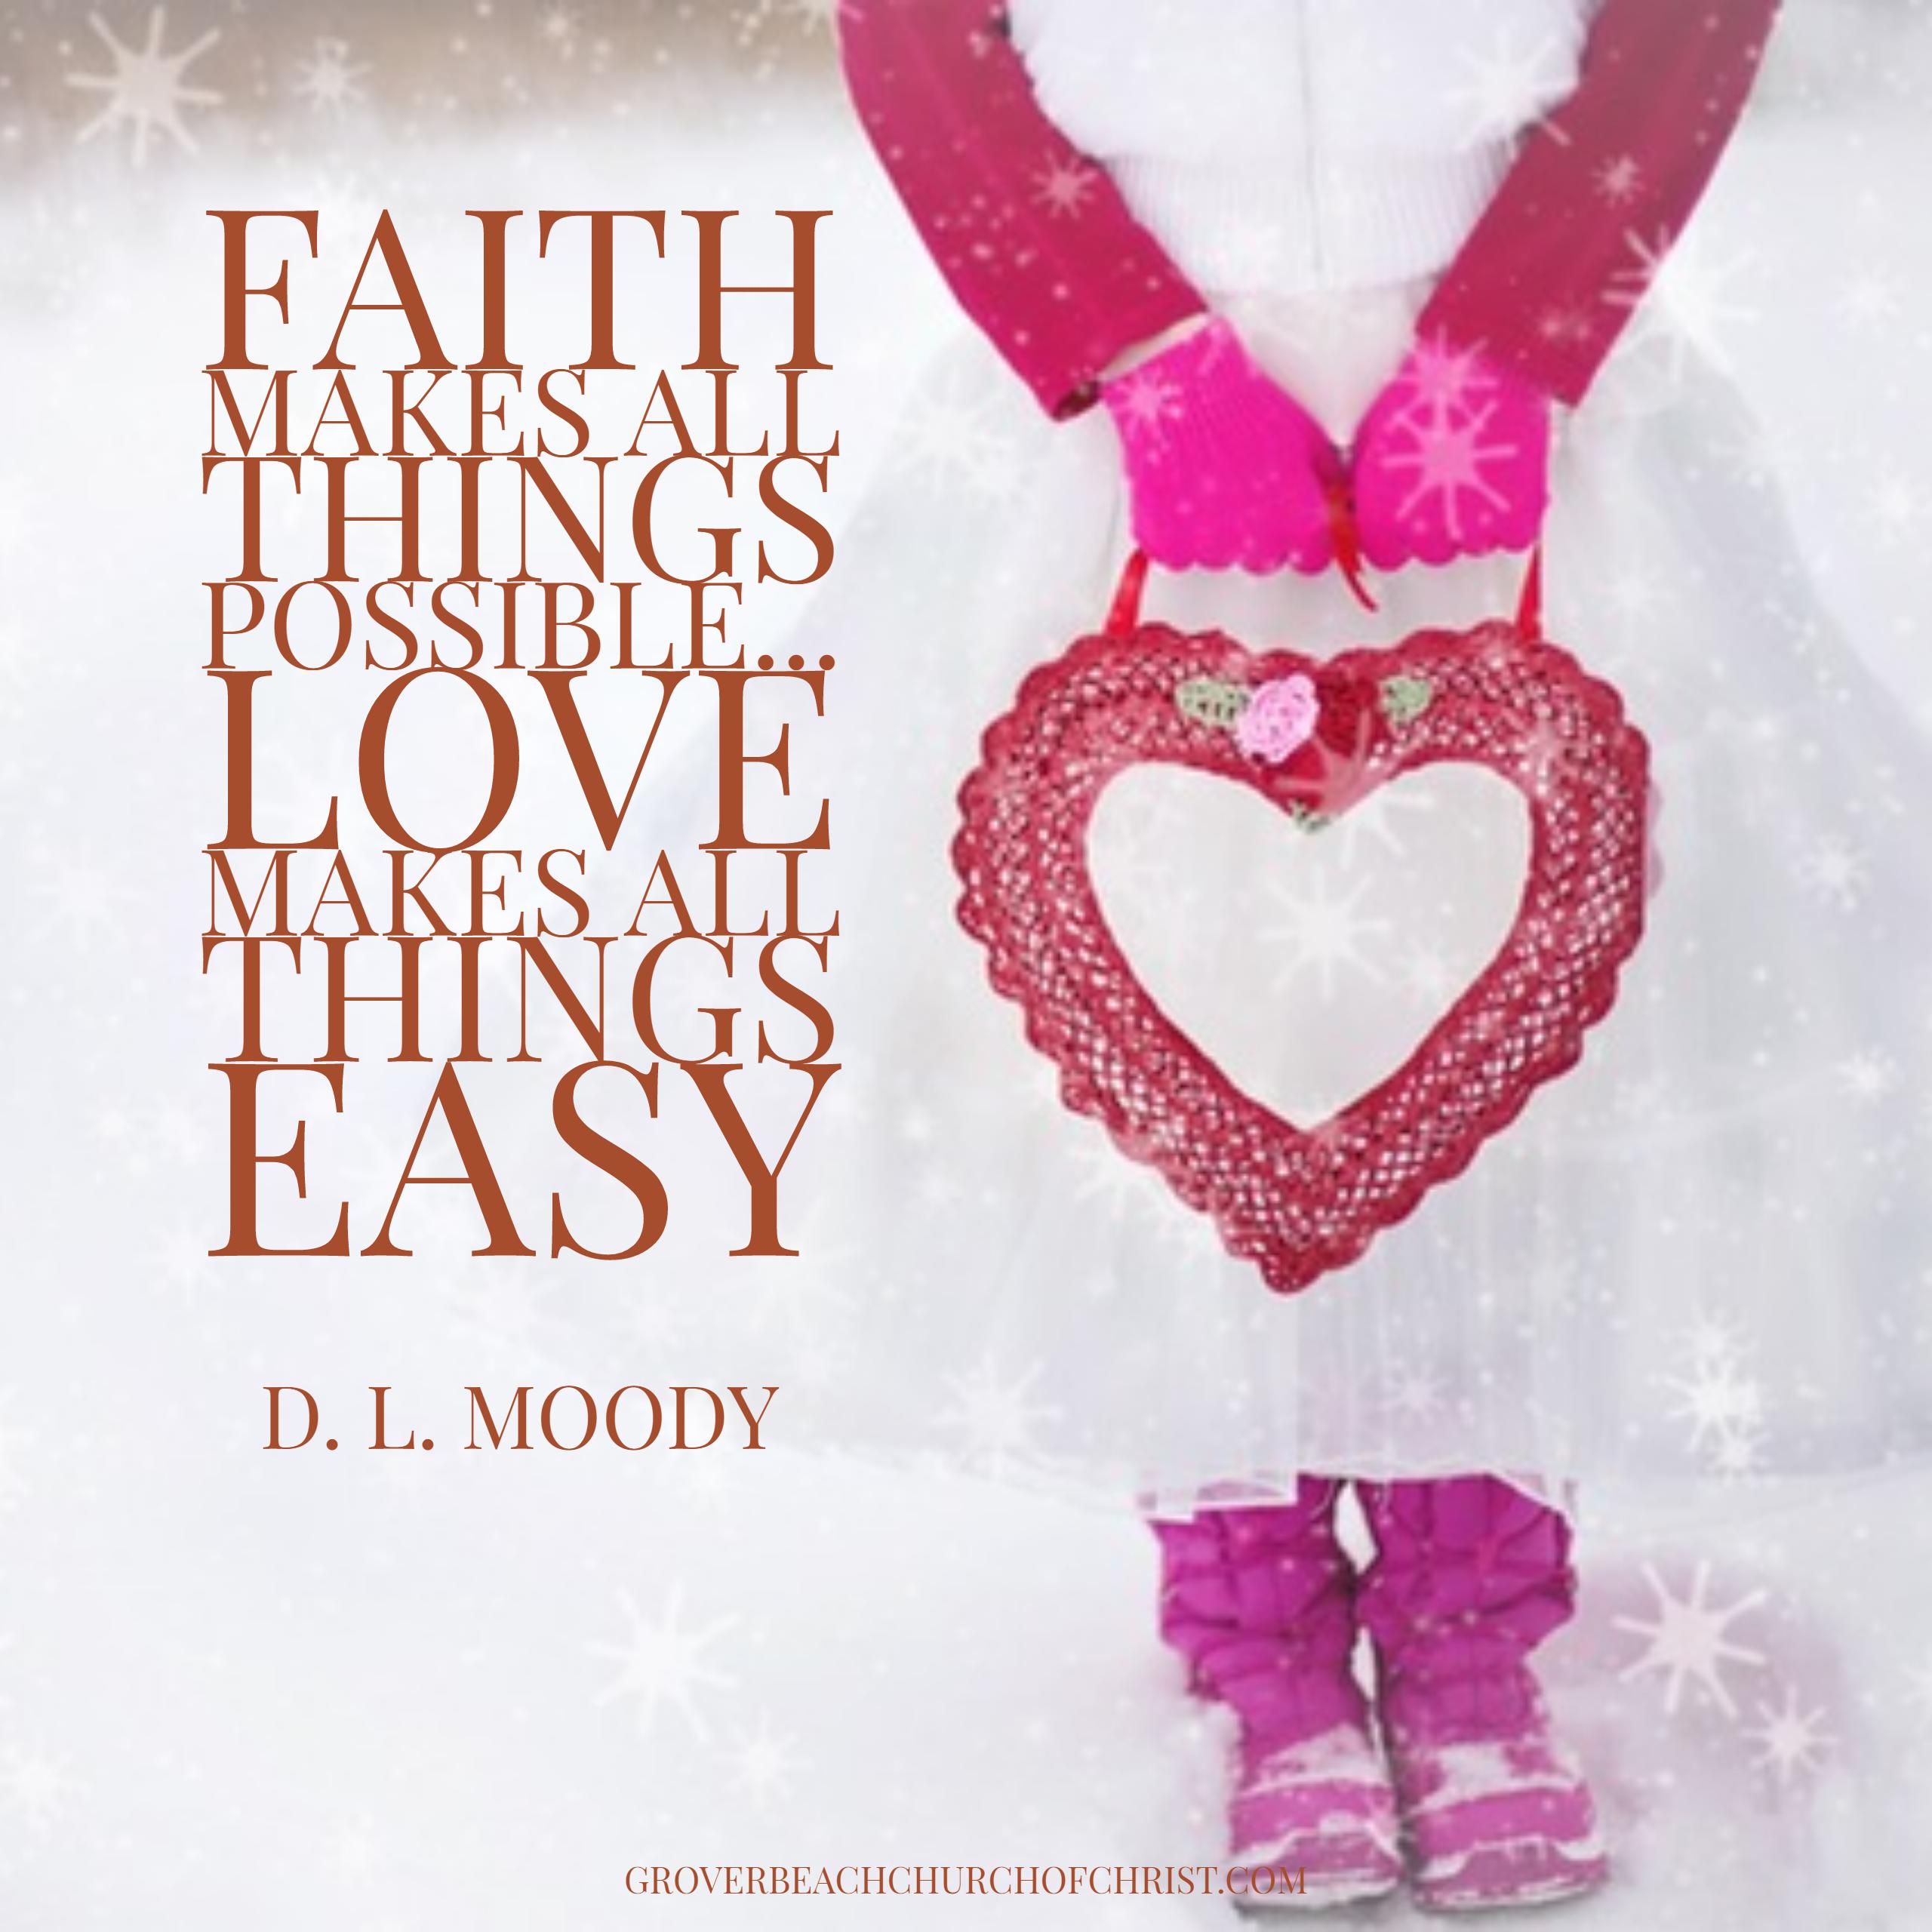 moody-faith-makes-all-things-possible